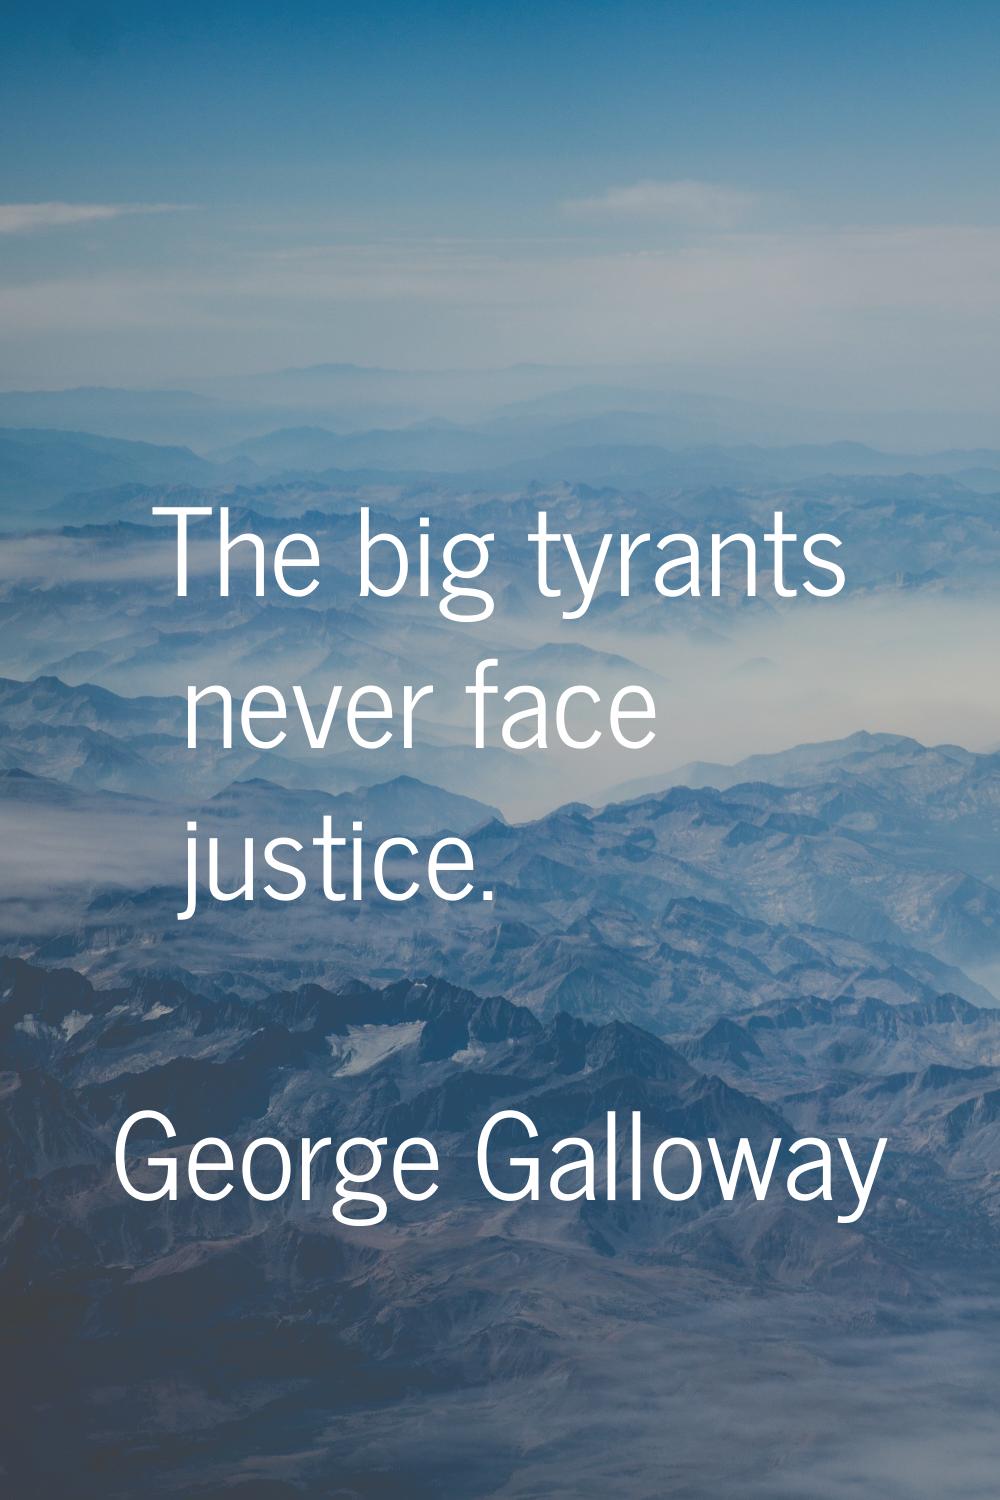 The big tyrants never face justice.